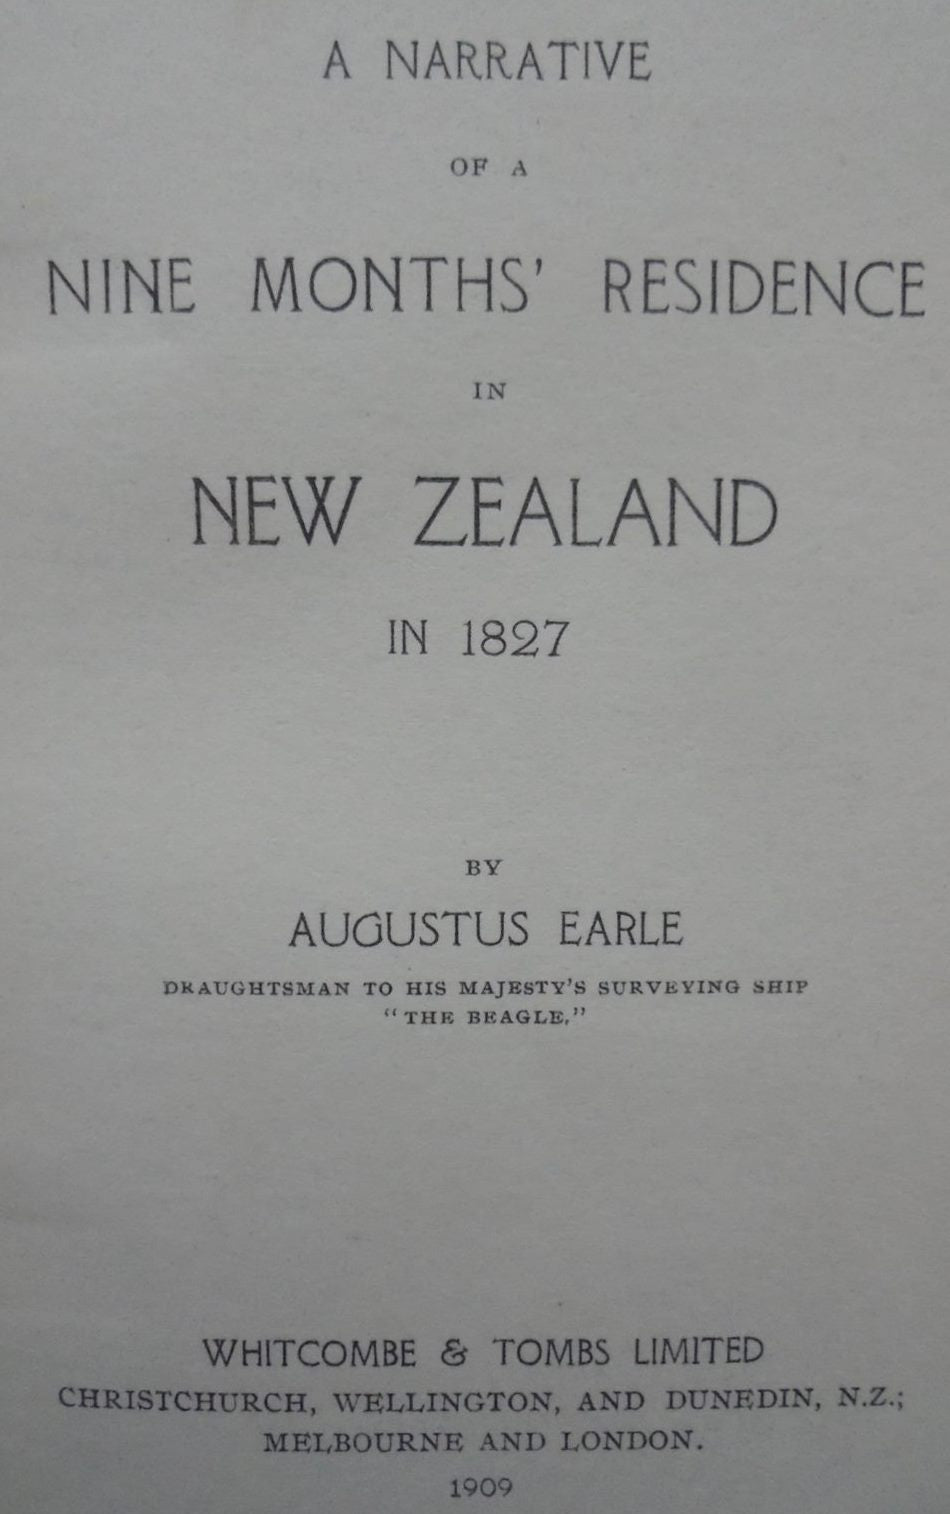 A Narrative of a Nine Months' Residence in New Zealand in 1827 by Augustus Earle.